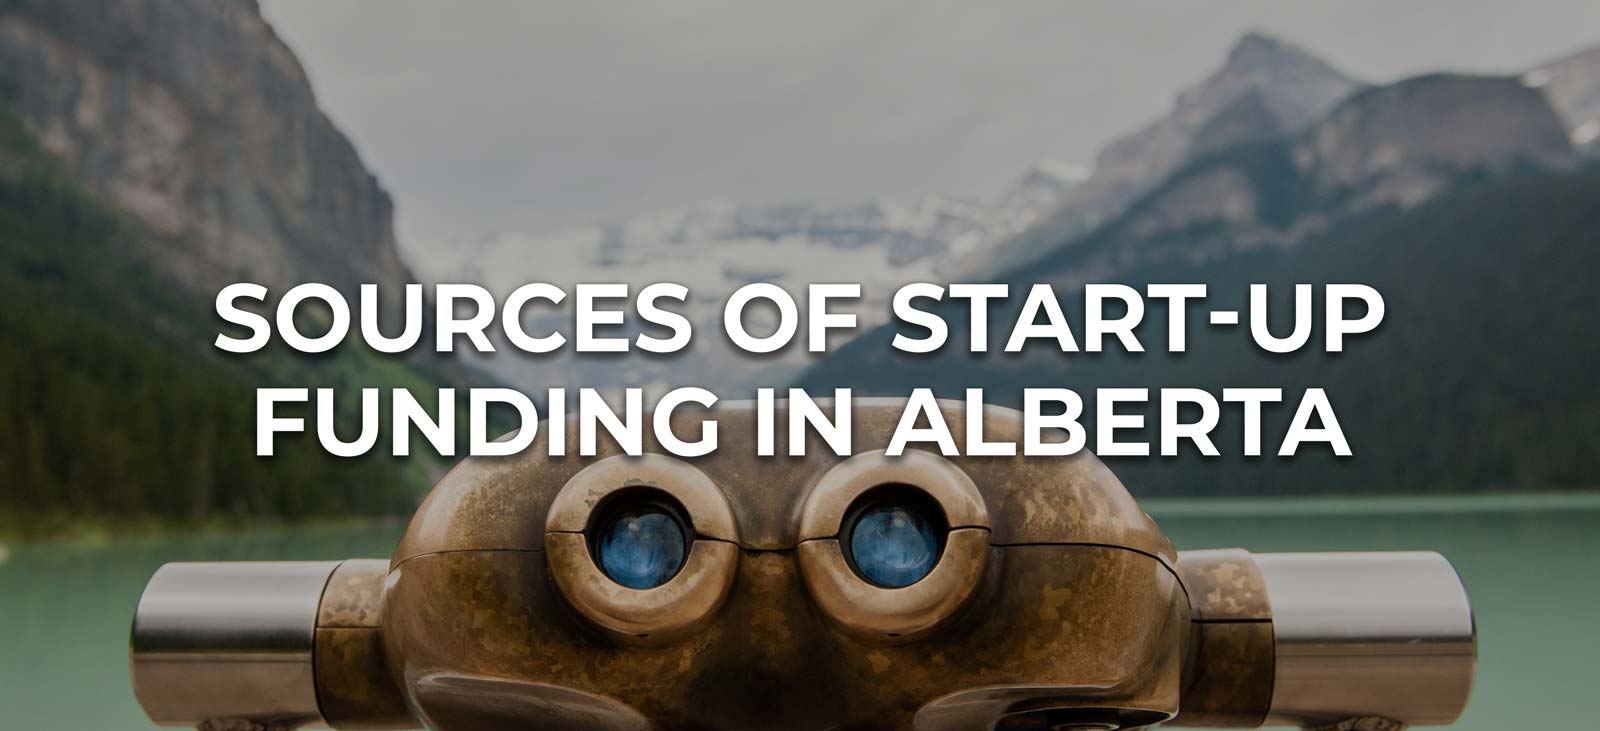 Sources of Start-Up Funding in Alberta